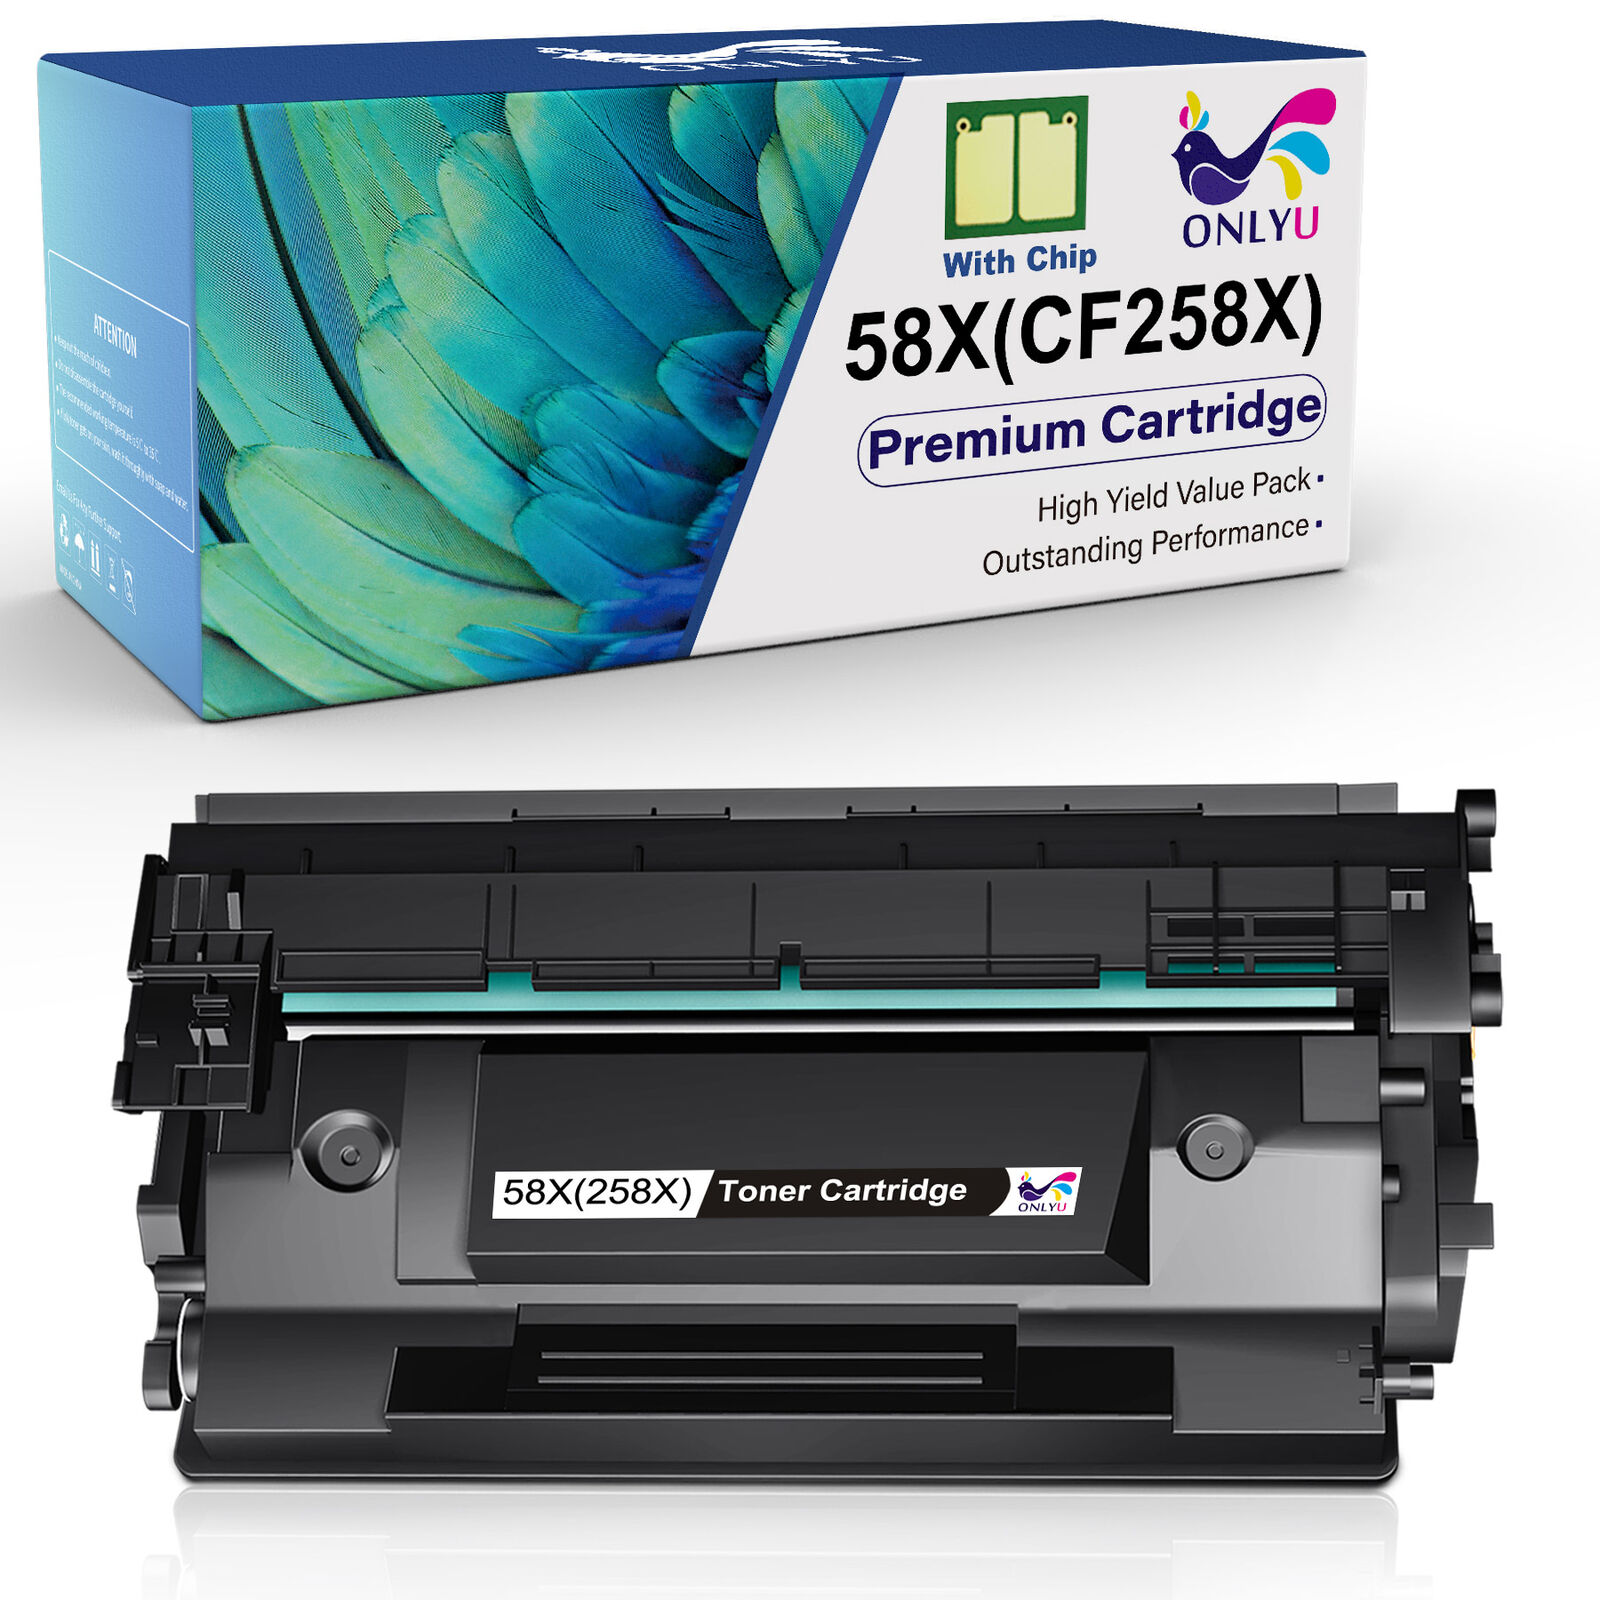 1x Toner Cartridge replacement for HP CF258X With Chip LaserJet M304 MFP M428fdw